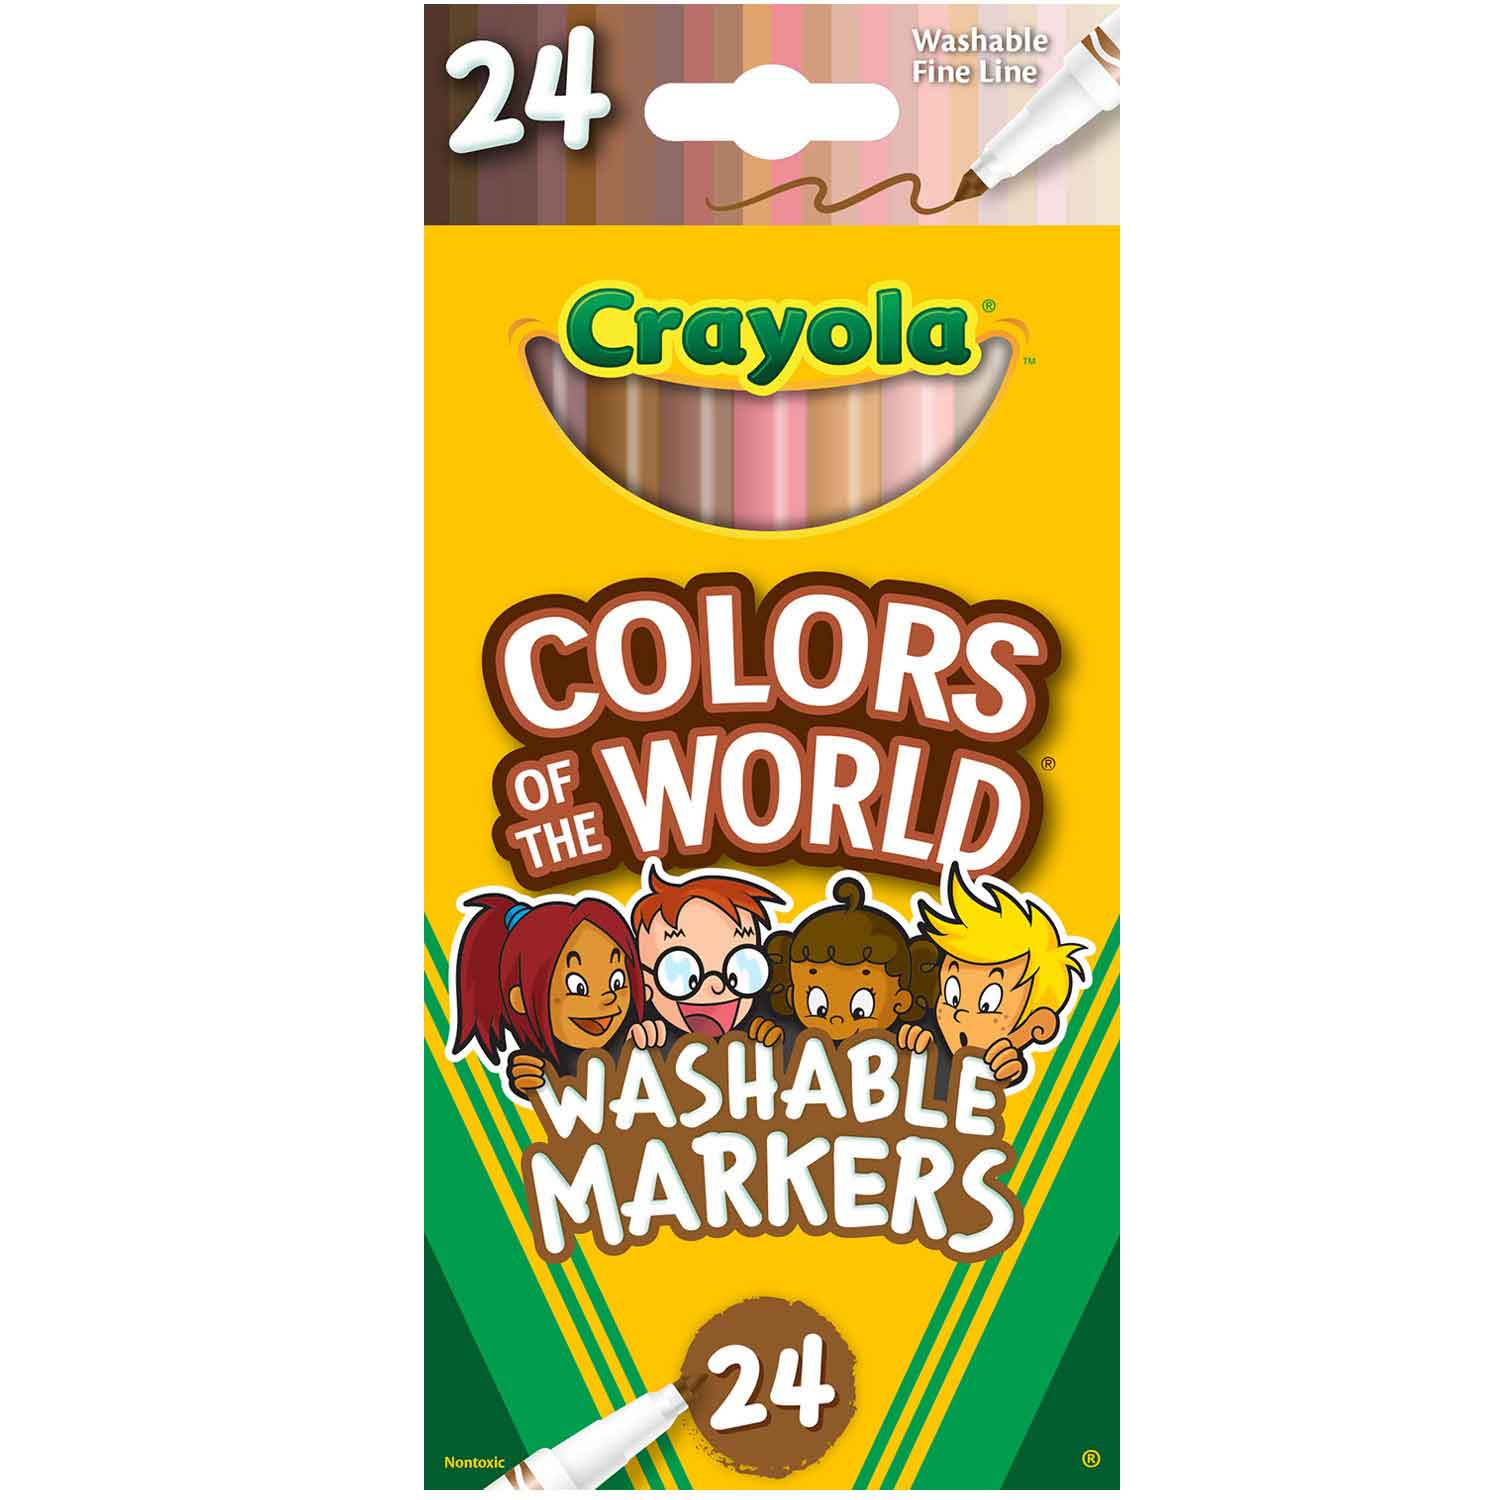 Bulk Markers  Washable Classroom Markers